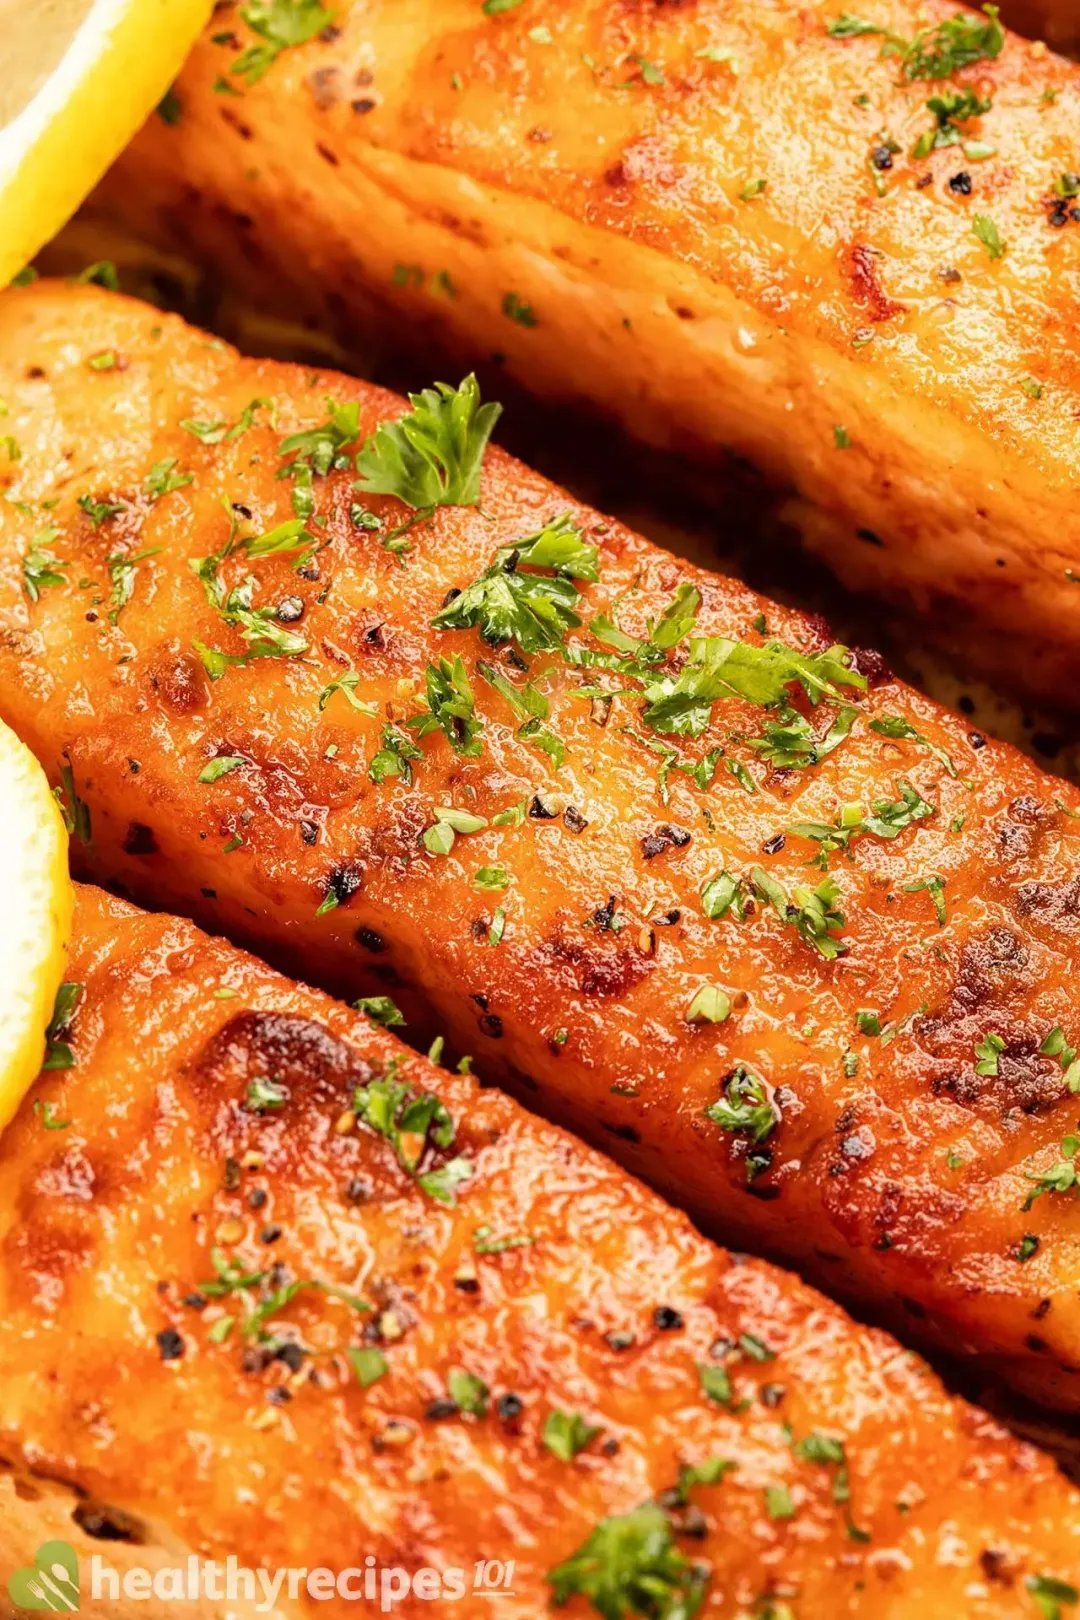 A super close-up view of the surface of some nicely browned salmon filets, sprinkled with chopped parsley and lemon slices.